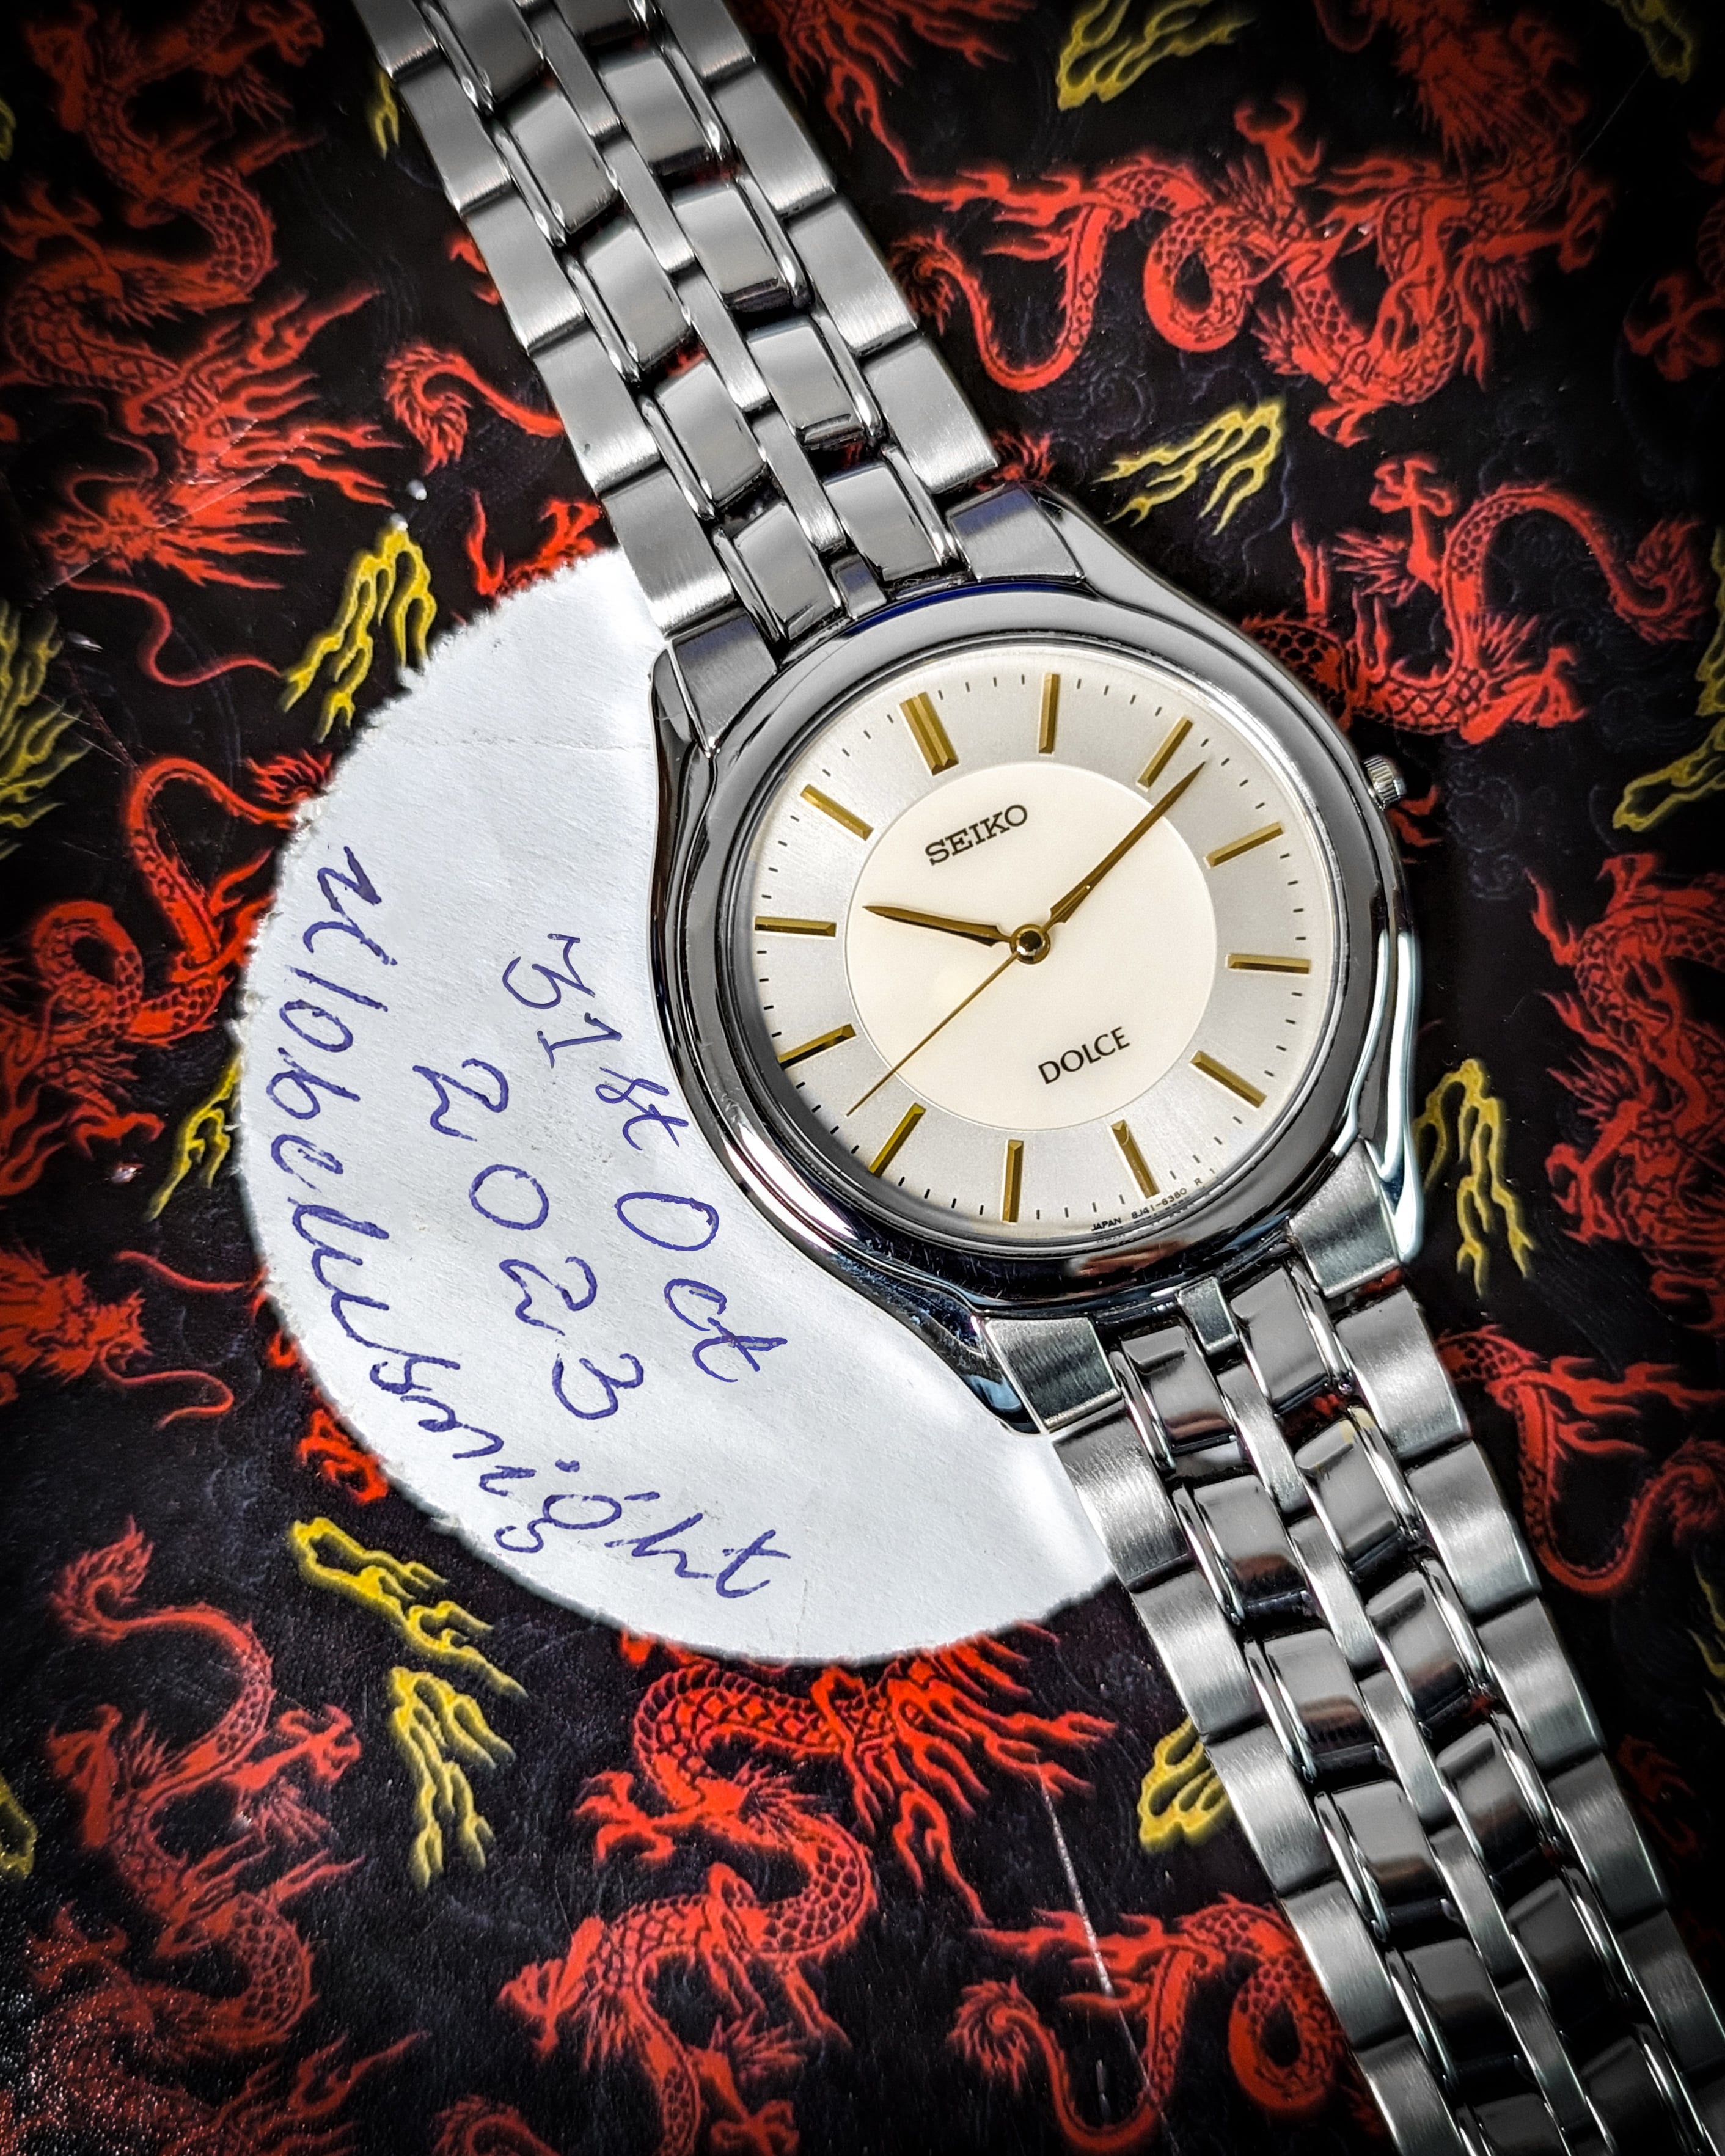 WTS] Vintage Seiko Dolce - 8J41-6030 – Mother of Pearl Dial 